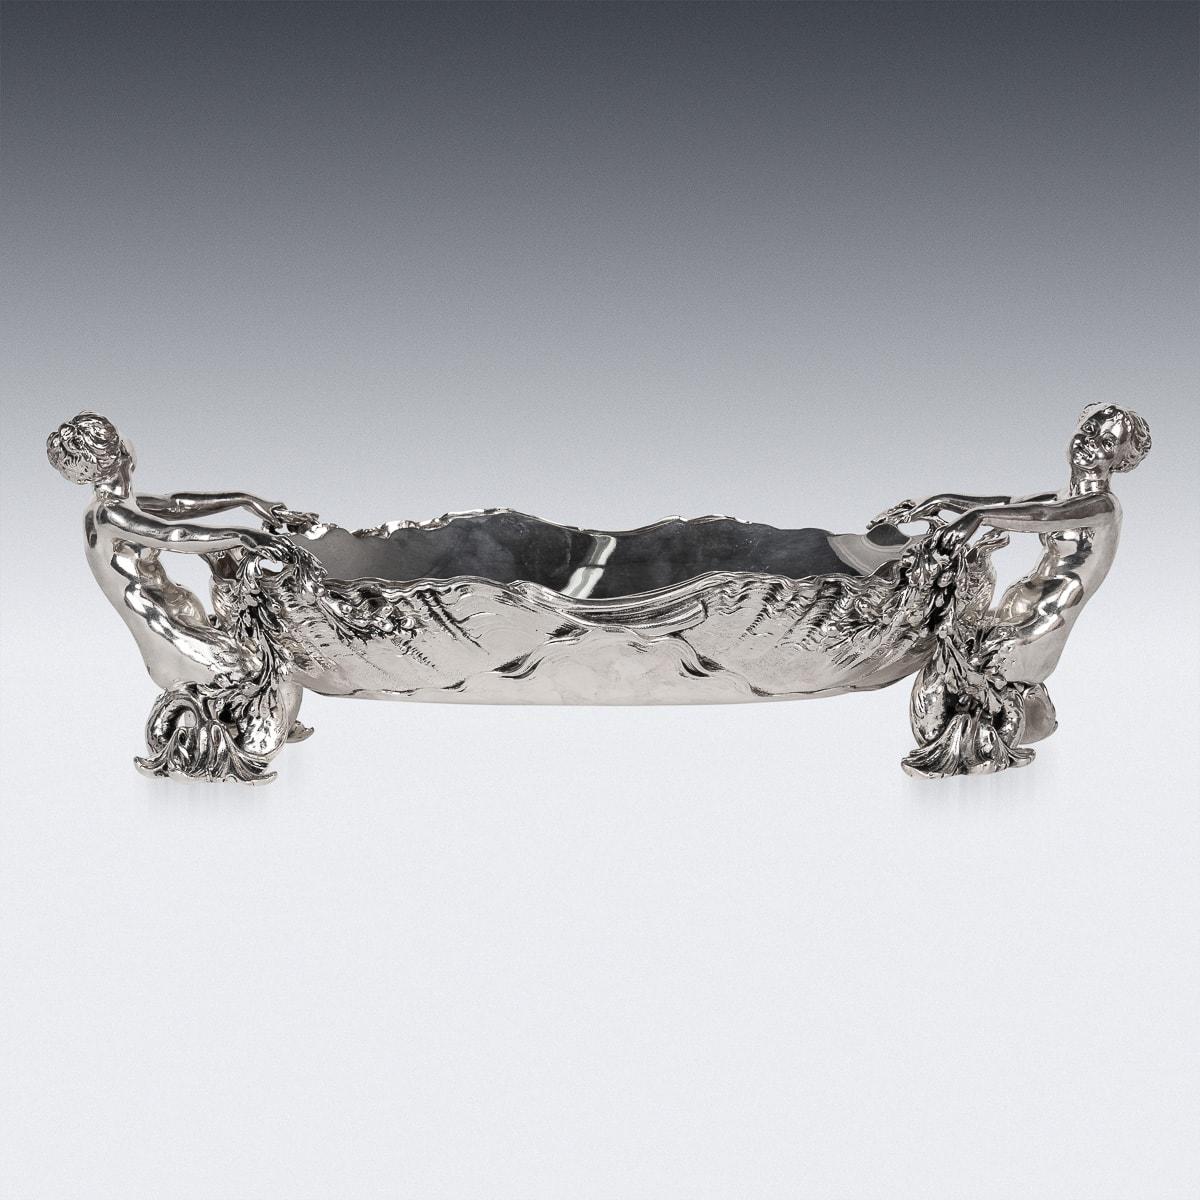 Antique 19th Century French grandiose silver-plated figural Jardinière takes center stage, accompanied by a pair of finely crafted mermen supporting an elongated dish in rococo style, complete with a removable liner. Hallmarked Christofle, numbered